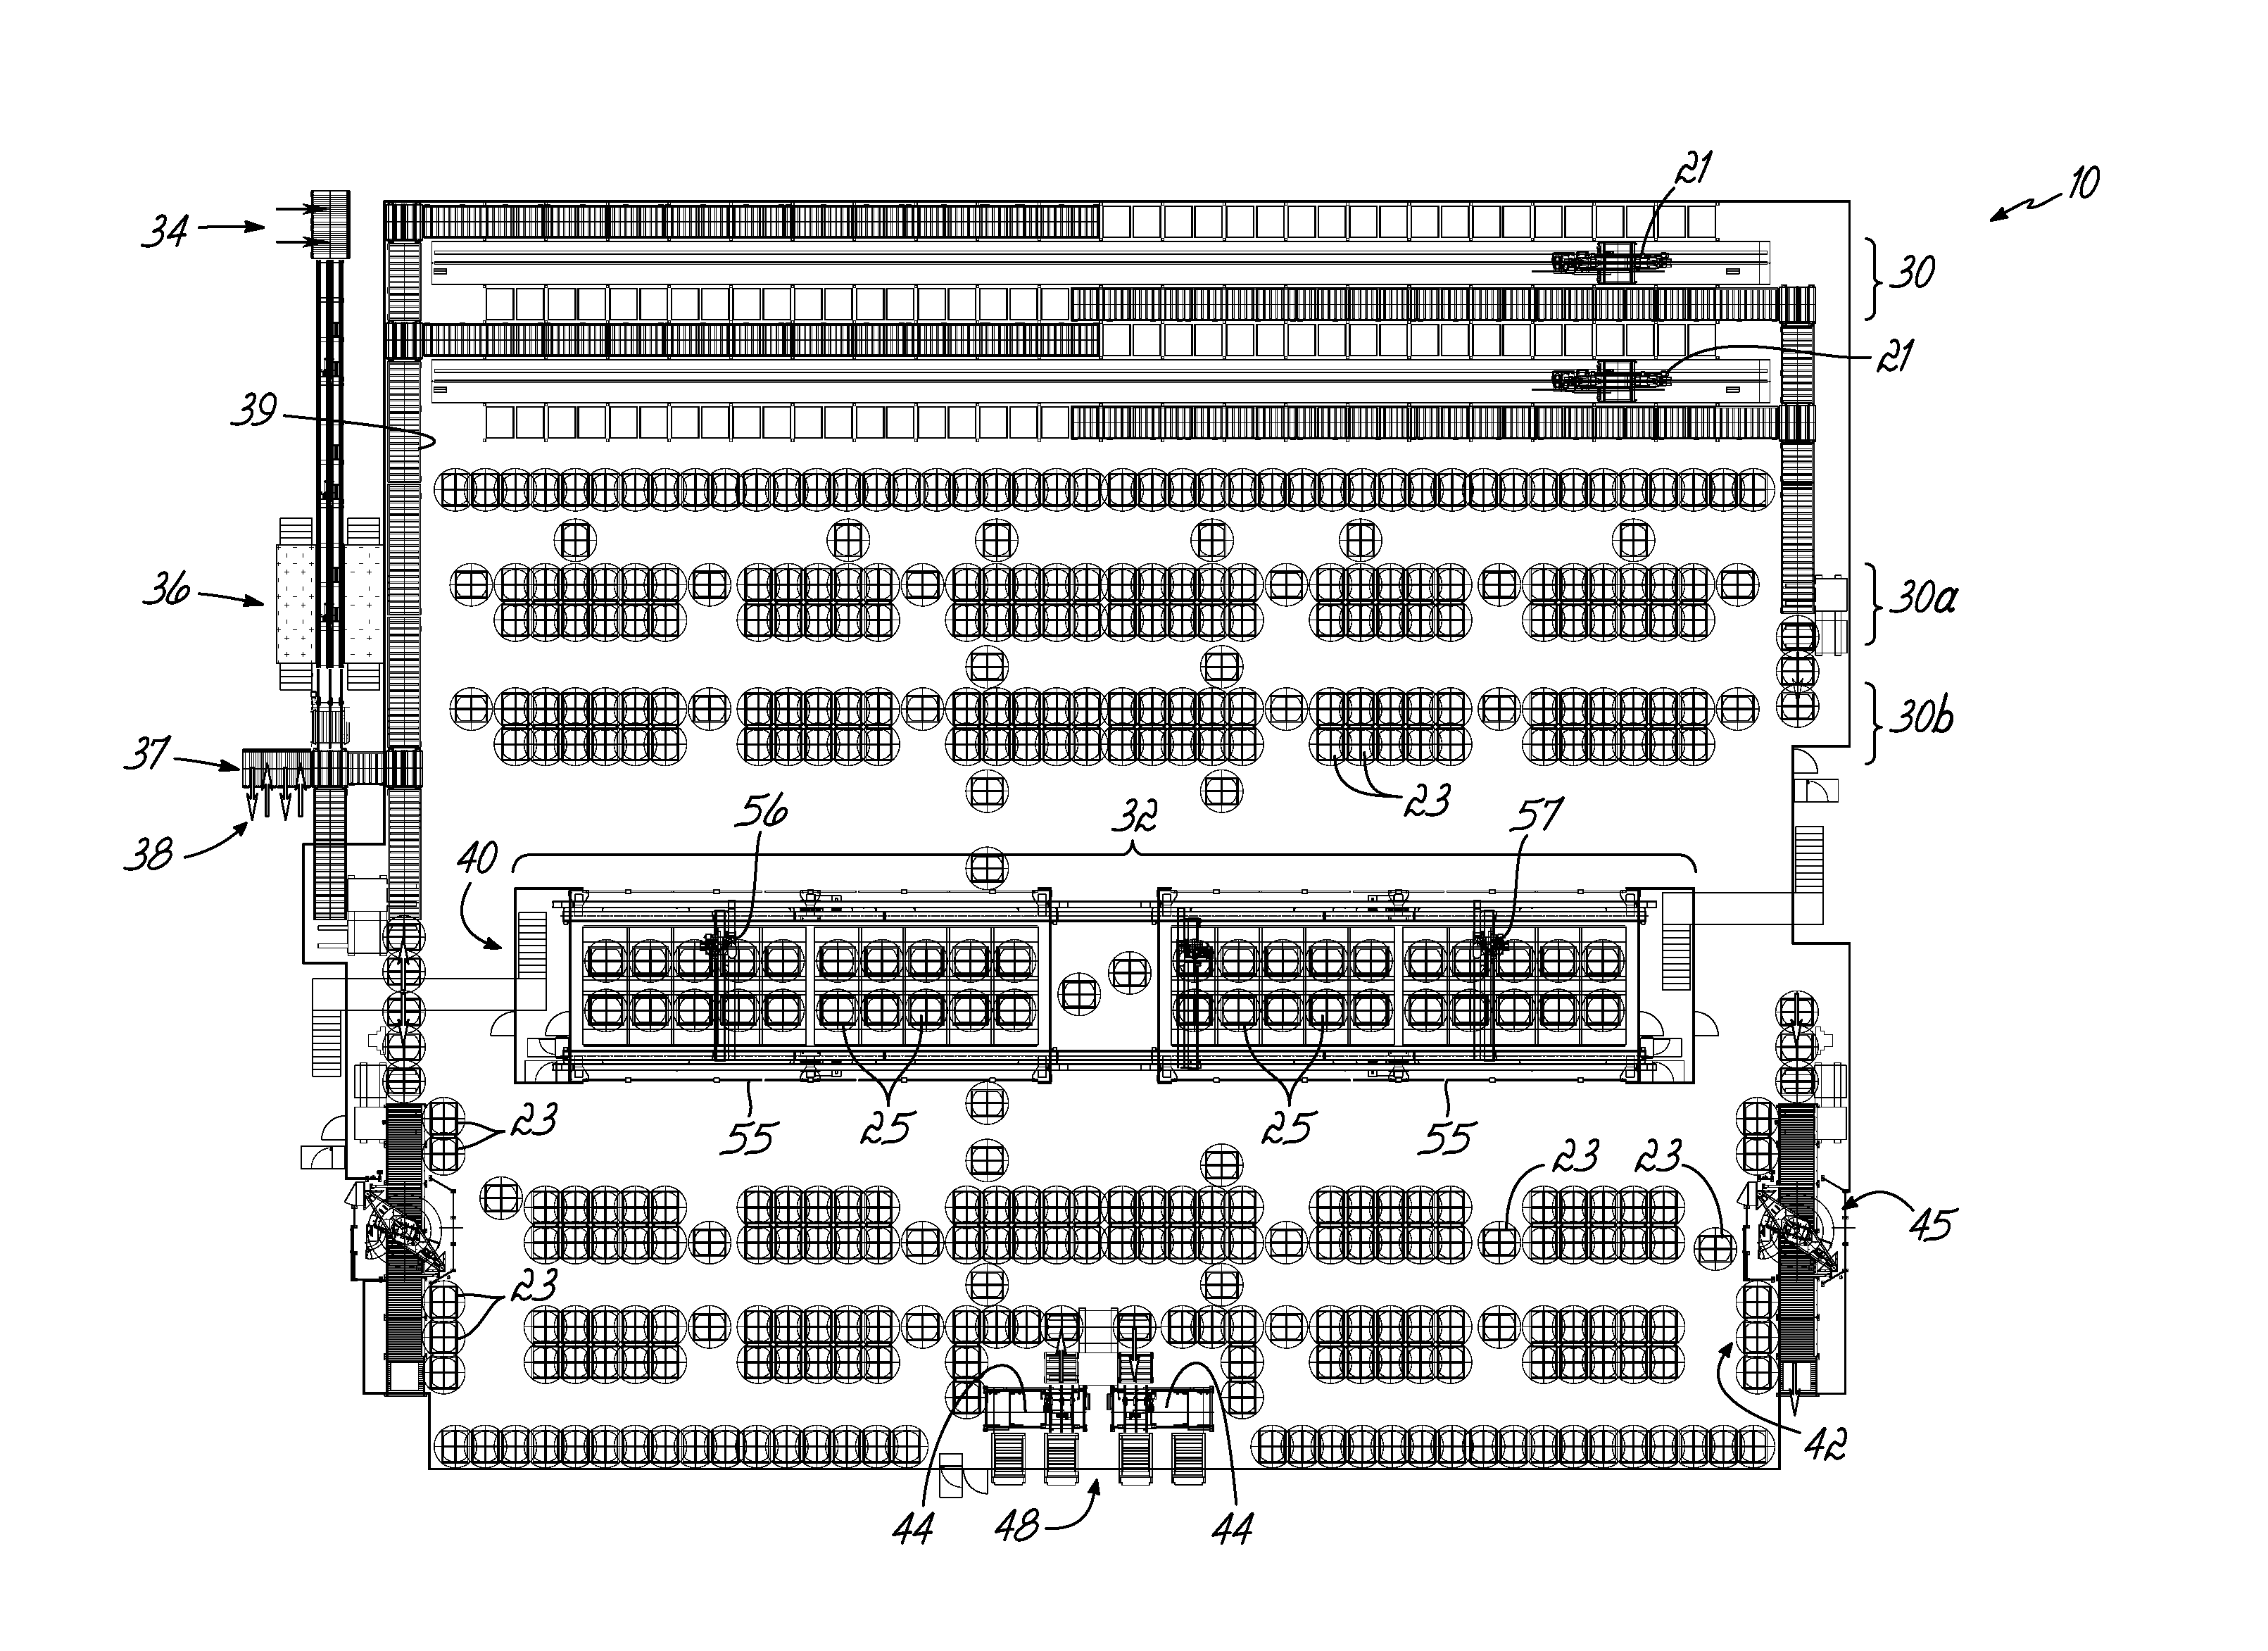 Automated layer picking and storage system